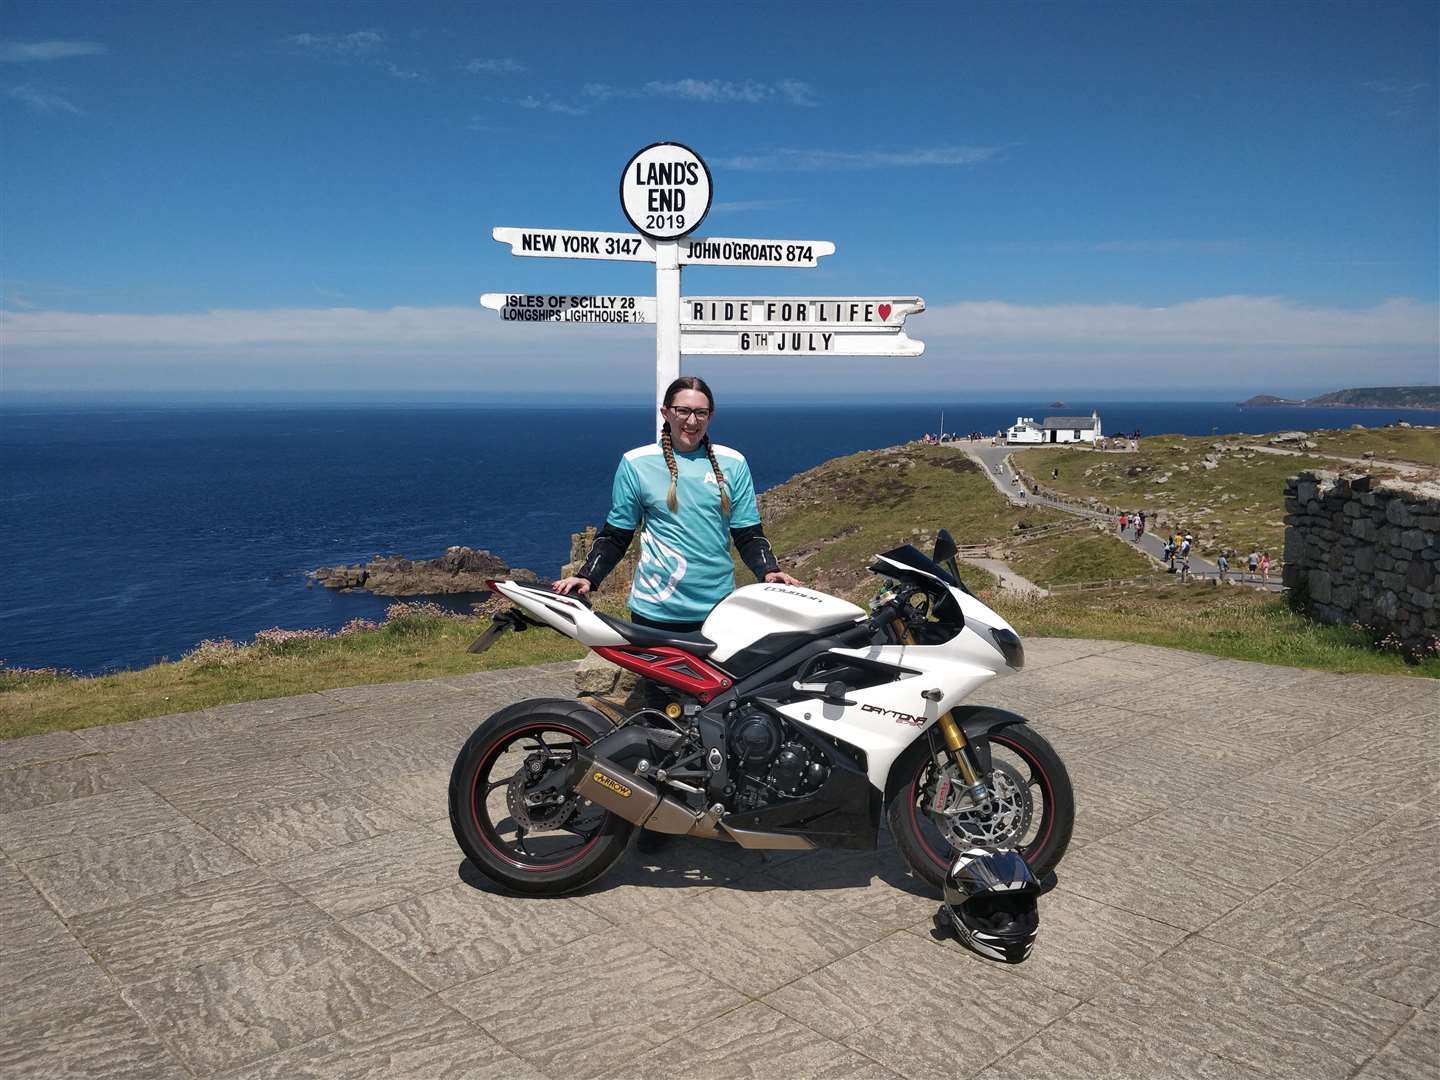 Emily preparing to set off from Land’s End.